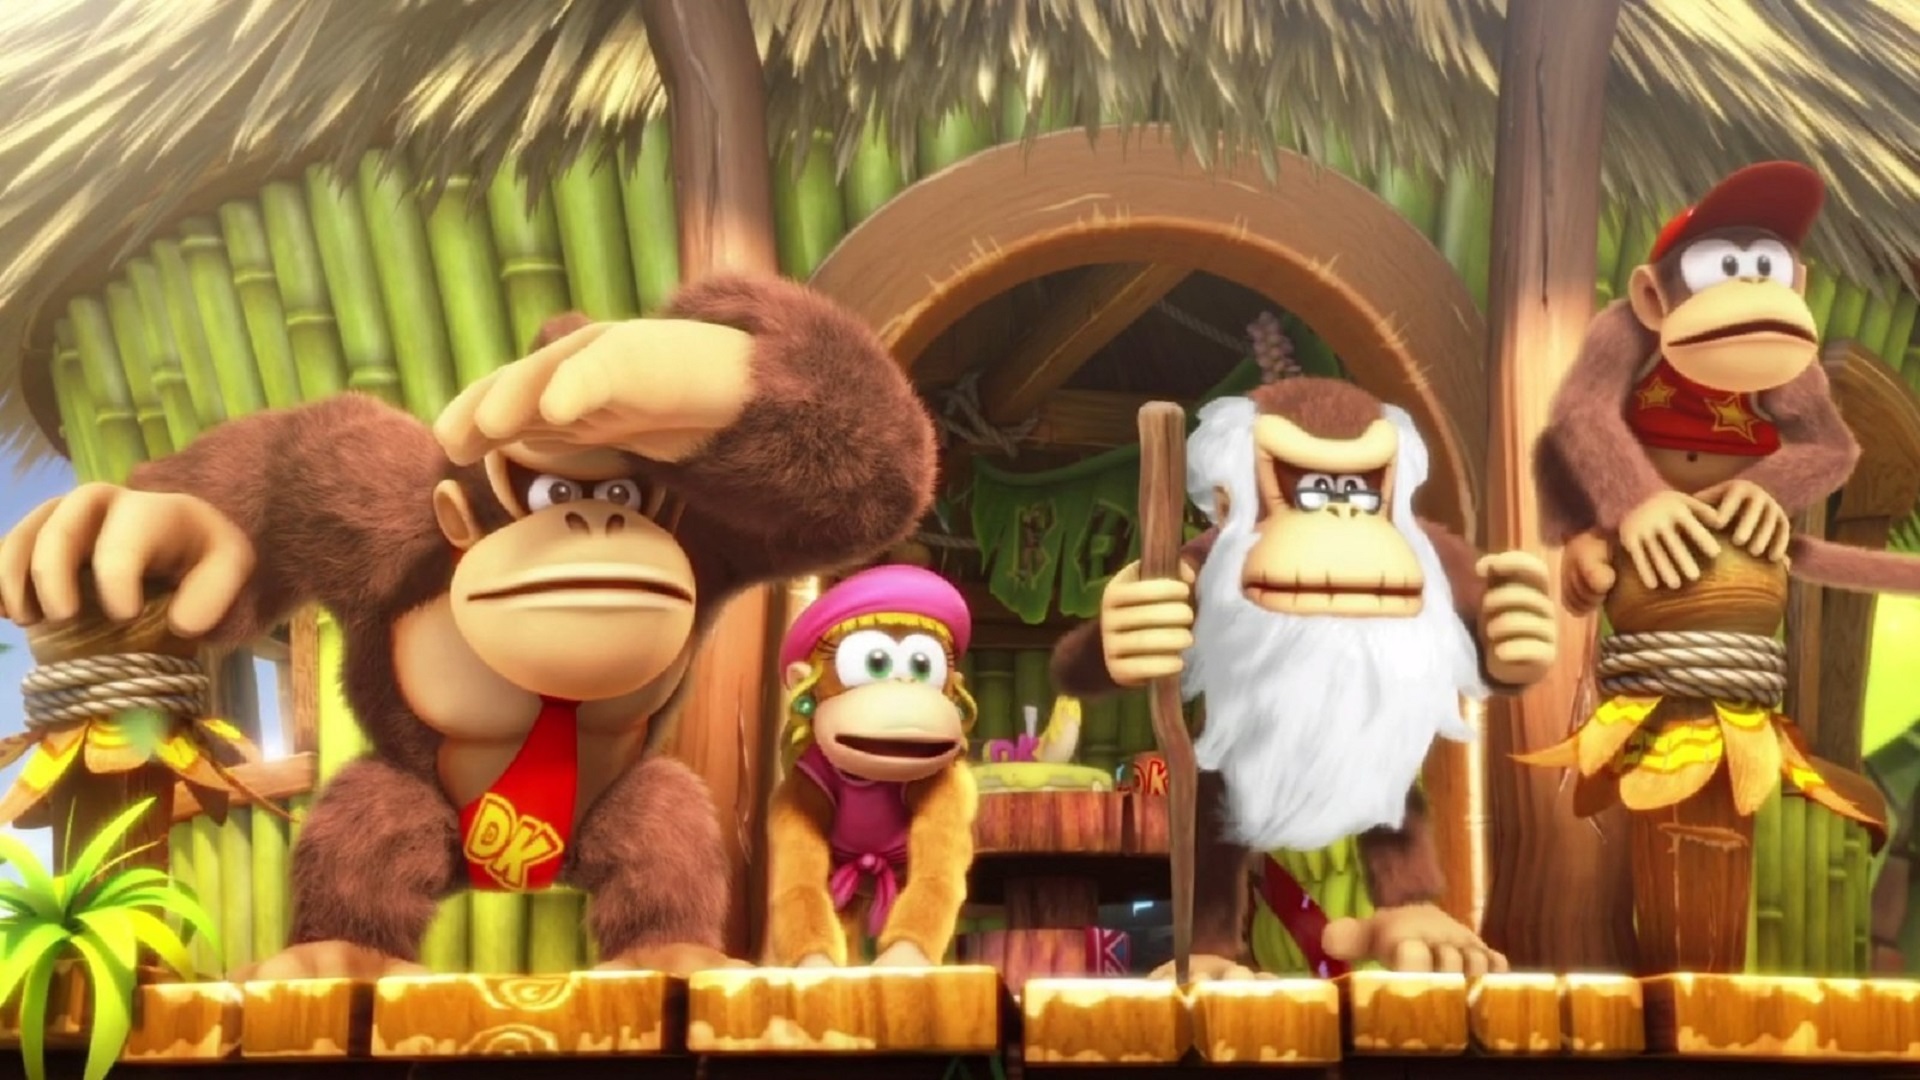 Upcoming Nintendo Direct Could Feature Donkey Kong and F-Zero Announcements – Rumour